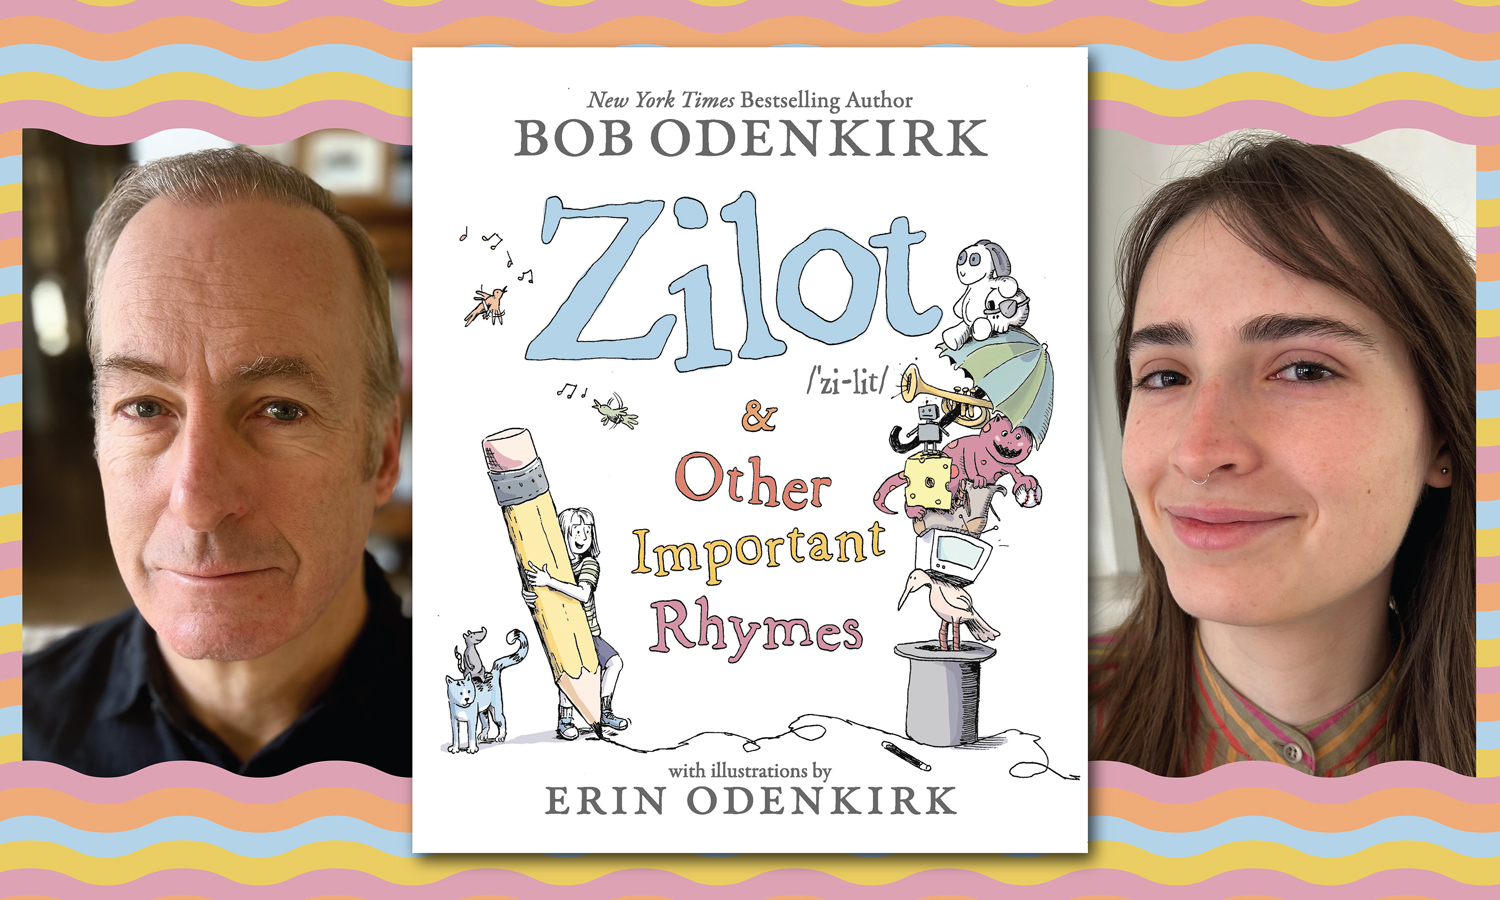 The cover of Zilot and Other Important Rhymes with Bob Odenkirk headshot on the left and Erin Odenkirk headshot on the right.